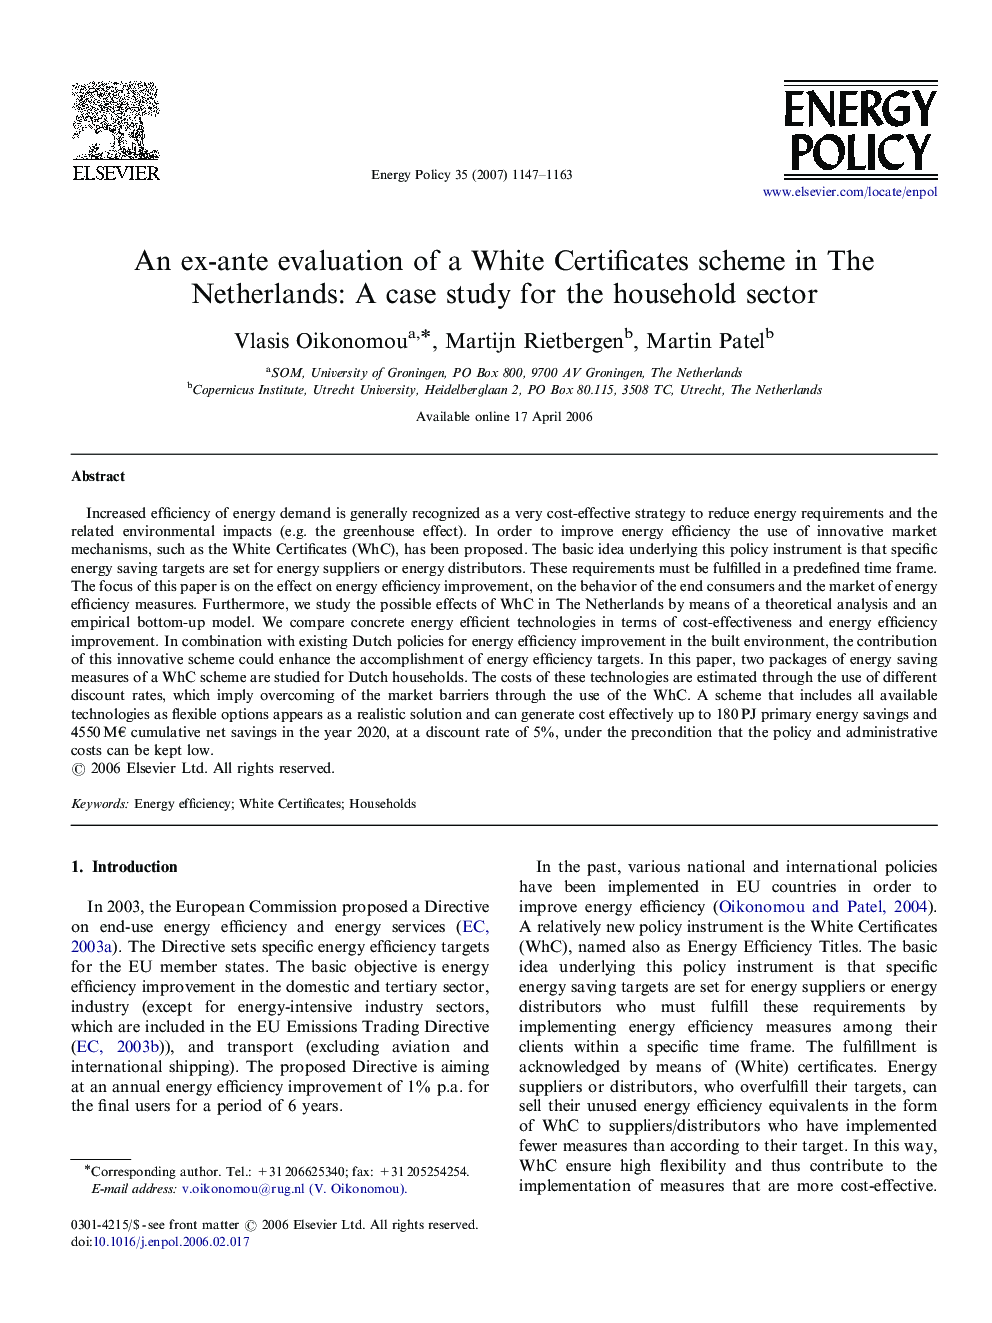 An ex-ante evaluation of a White Certificates scheme in The Netherlands: A case study for the household sector